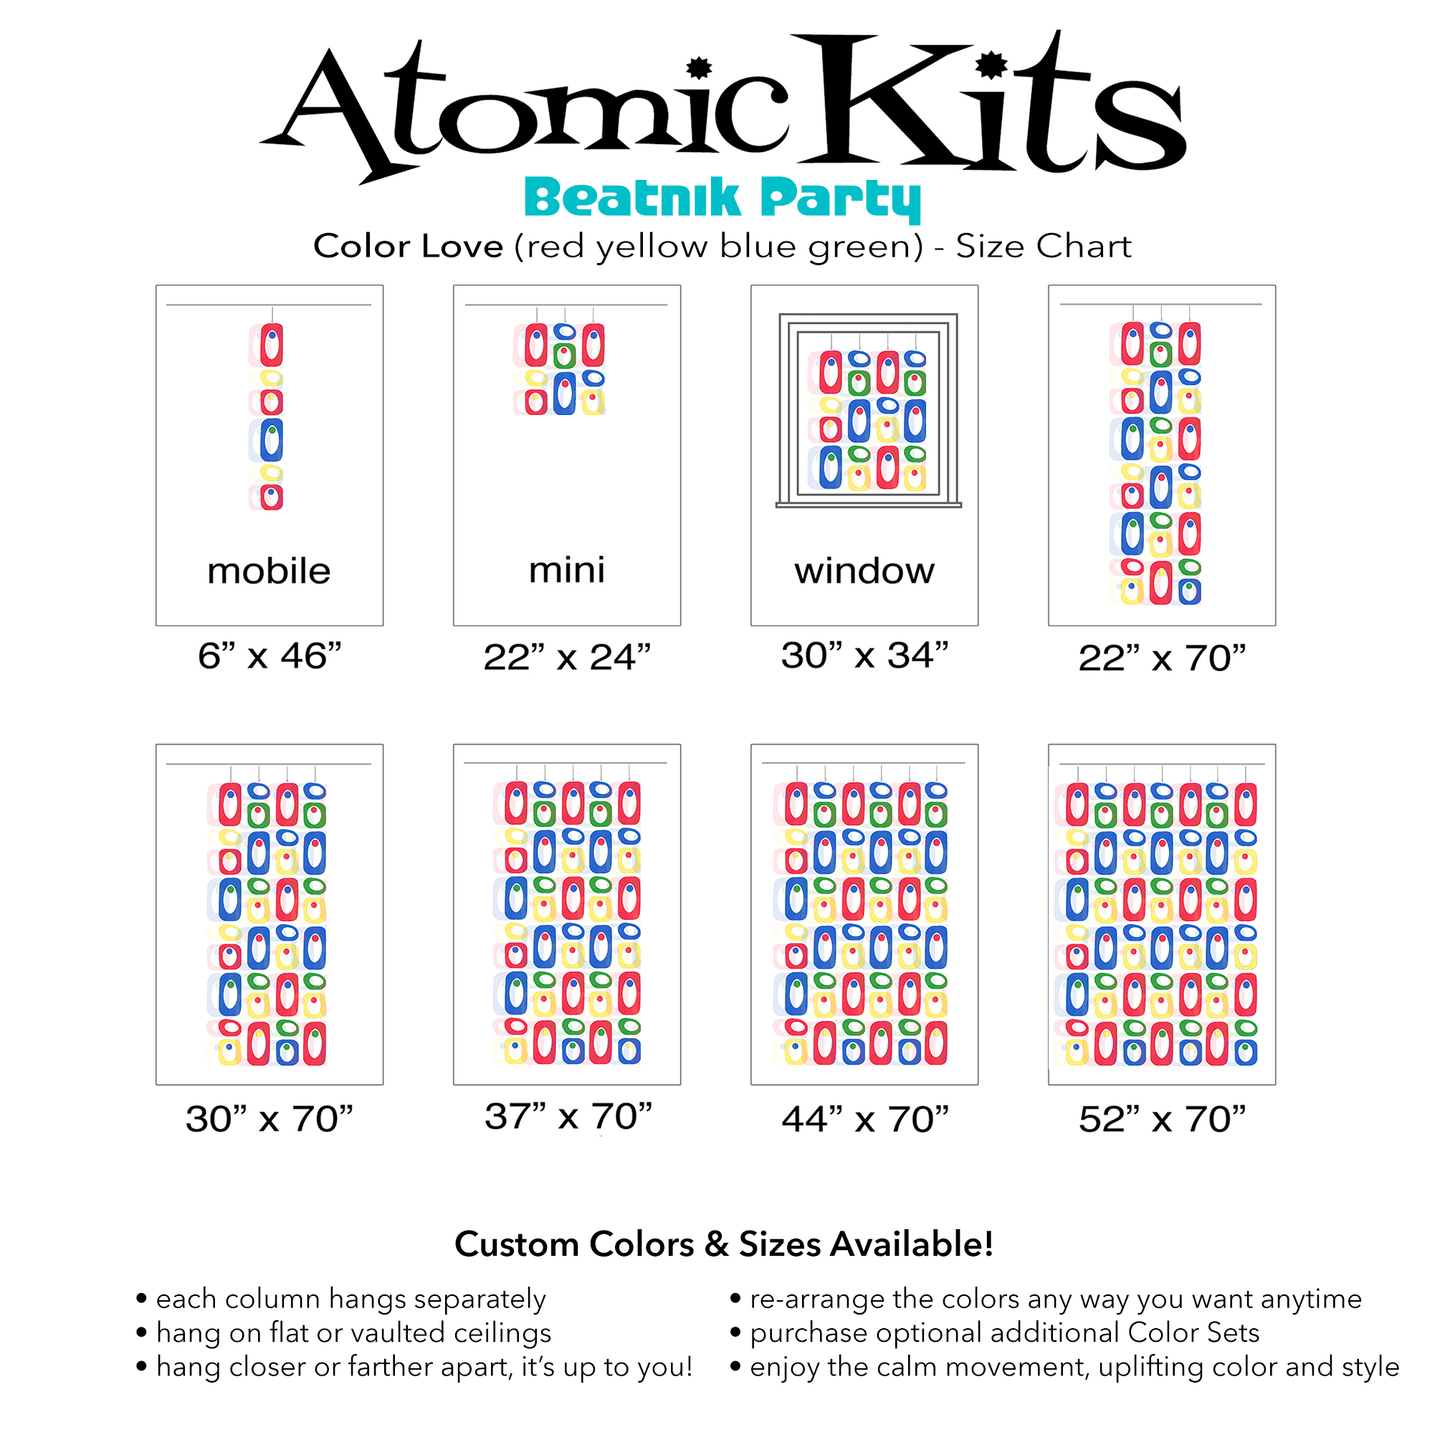 Color Chart for bold red yellow blue and green  DIY Atomic Kits in clear colorful plexiglass acrylic - mid century modern hanging art mobiles, curtains, room dividers, screens by AtomicMobiles.com